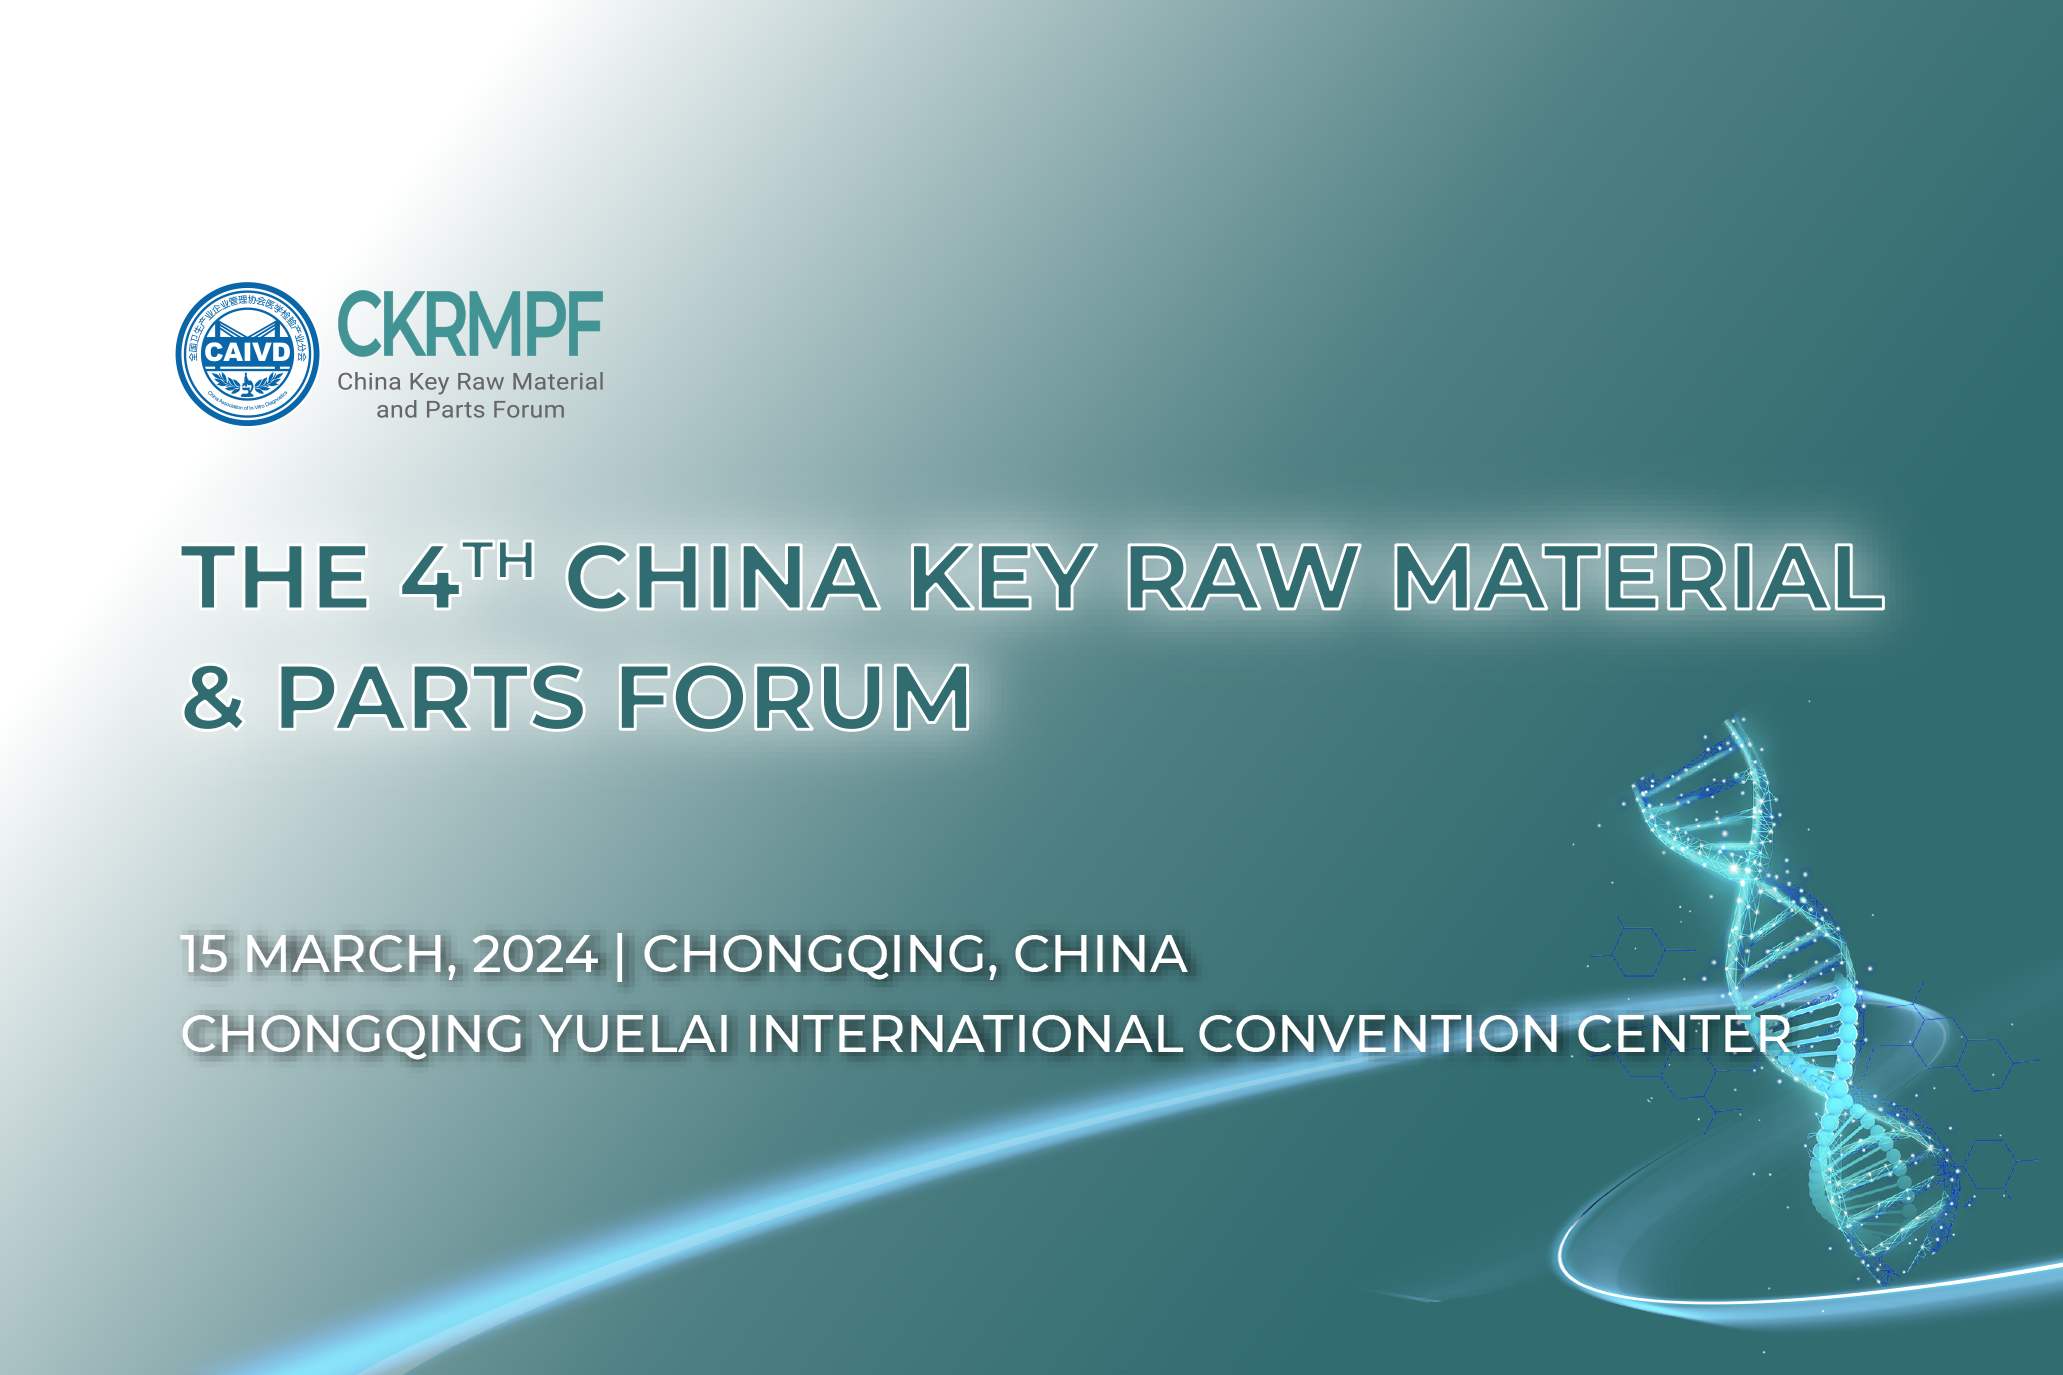 The 4th China Key Raw Material & Parts Forum is scheduled to be held on 15 March in 2024